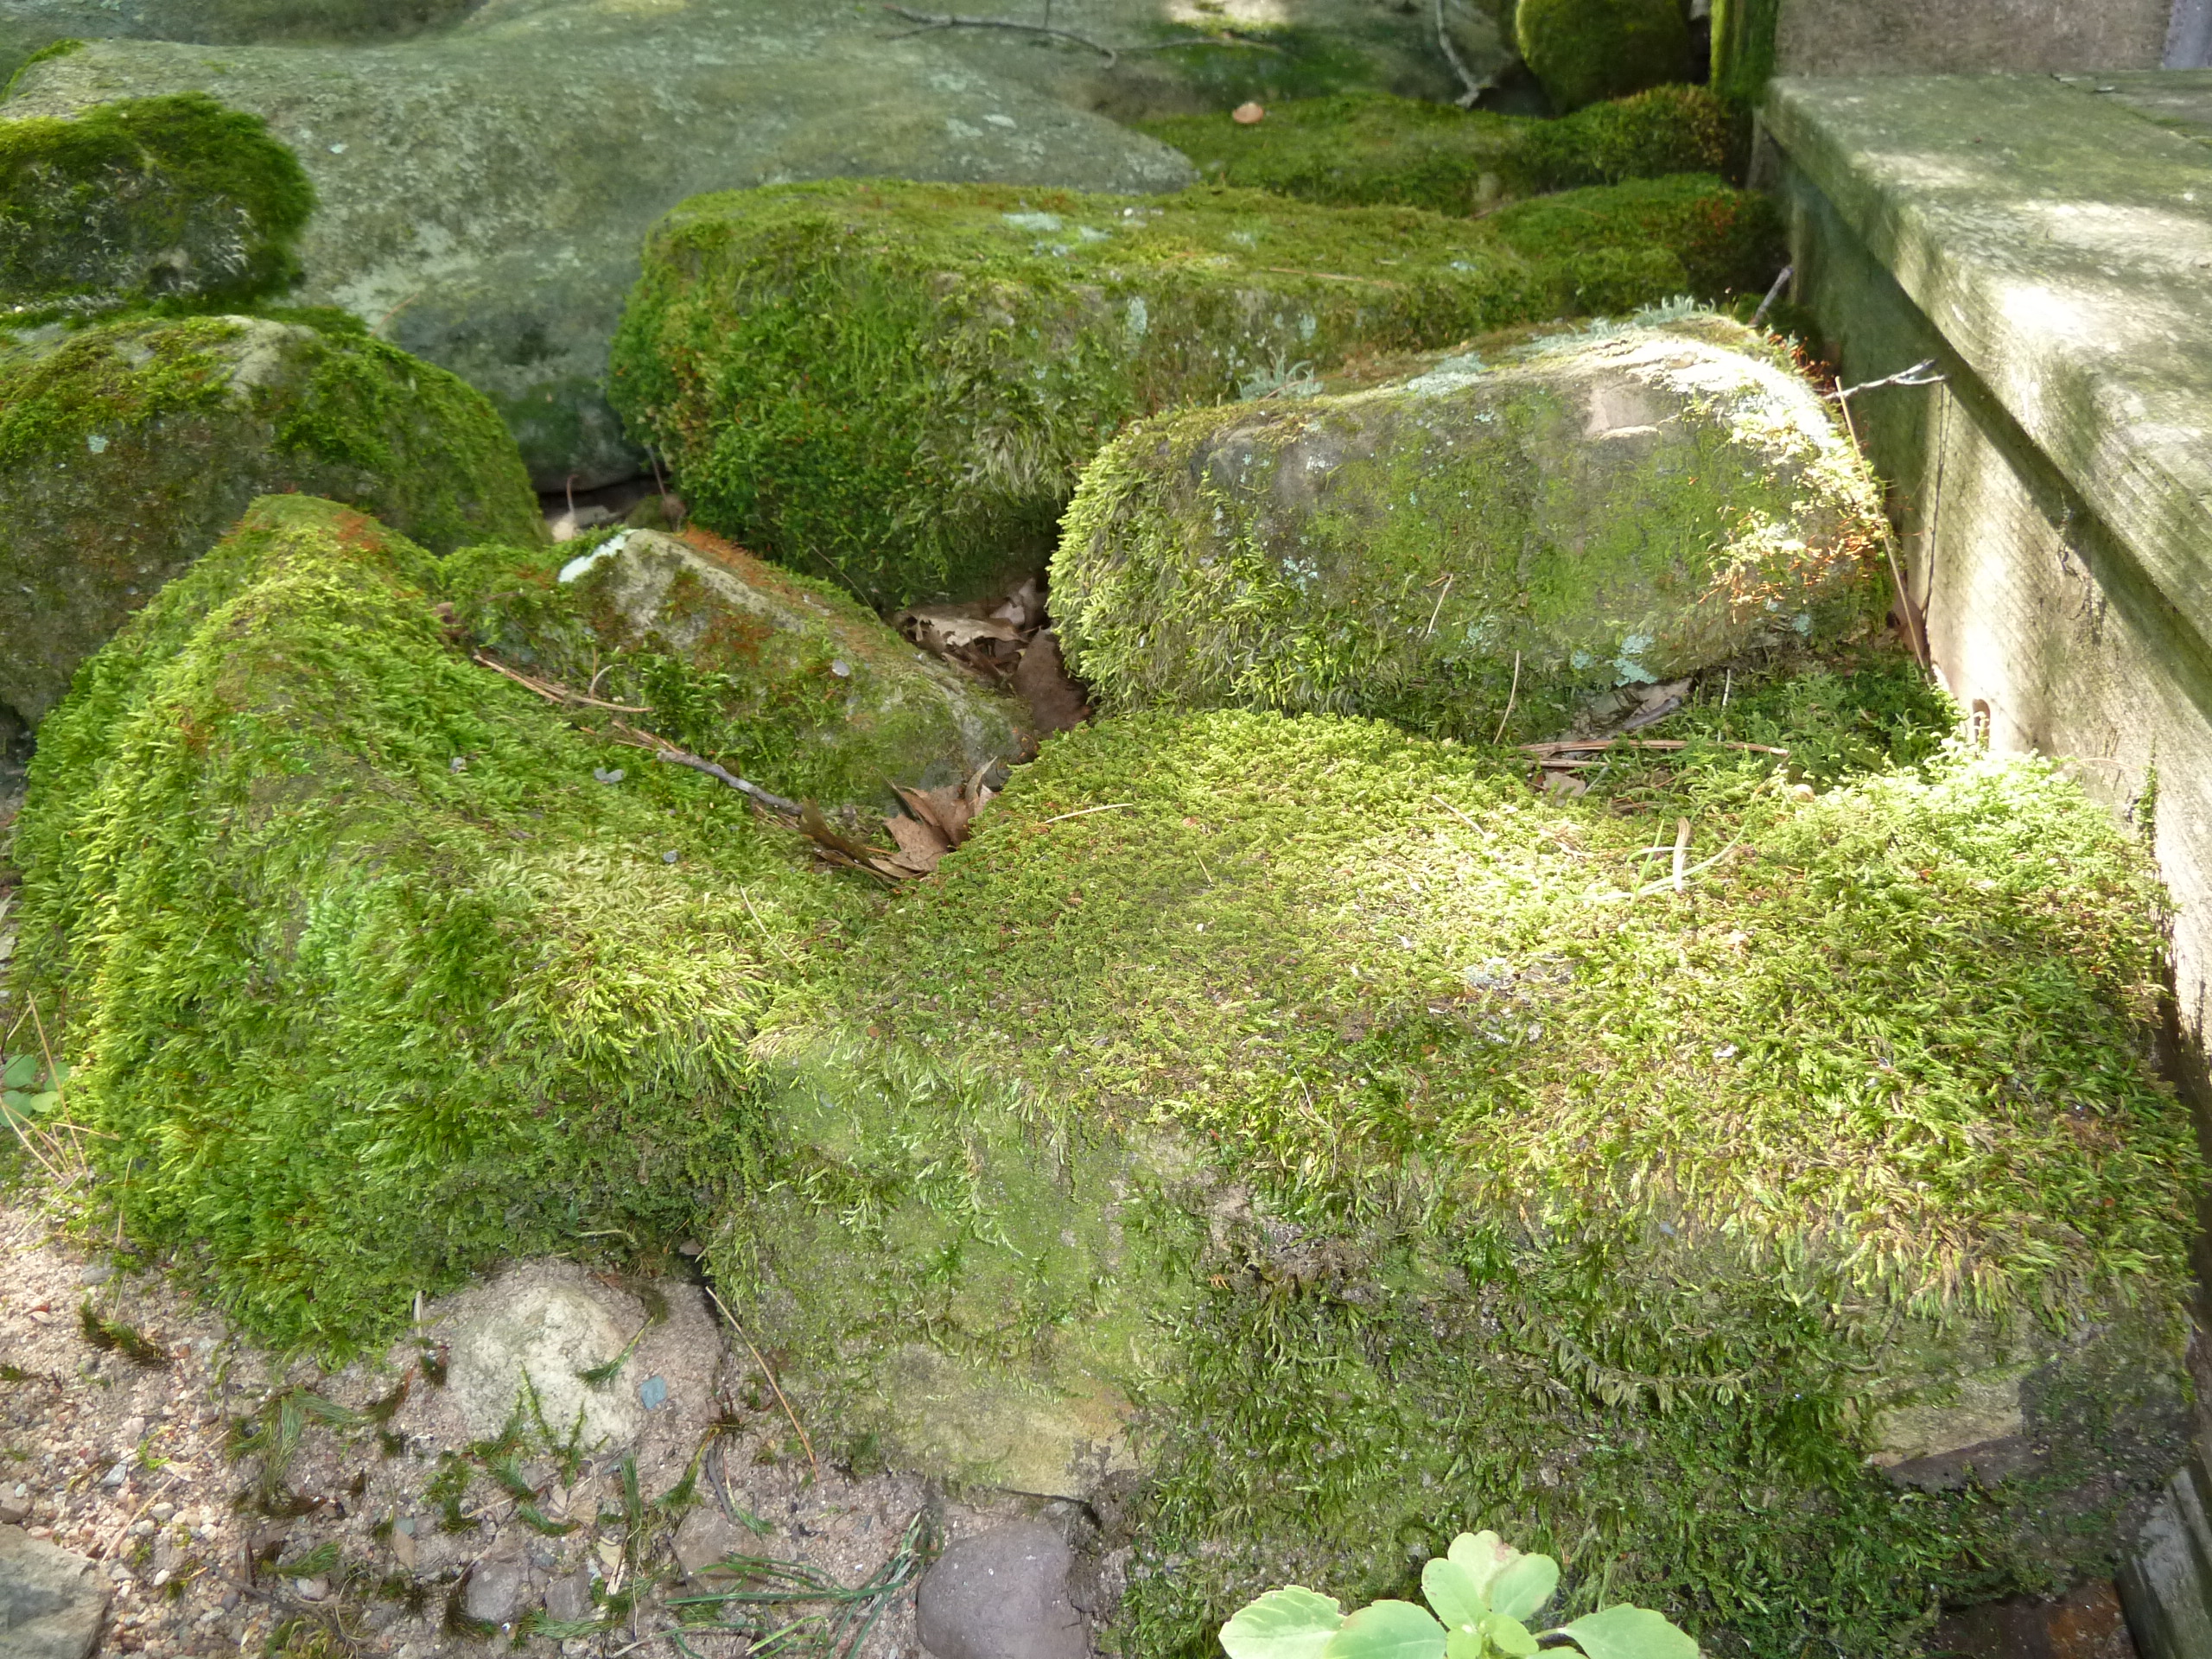 Sunday Photos: Moss covered rocks | Sincerely, Emily